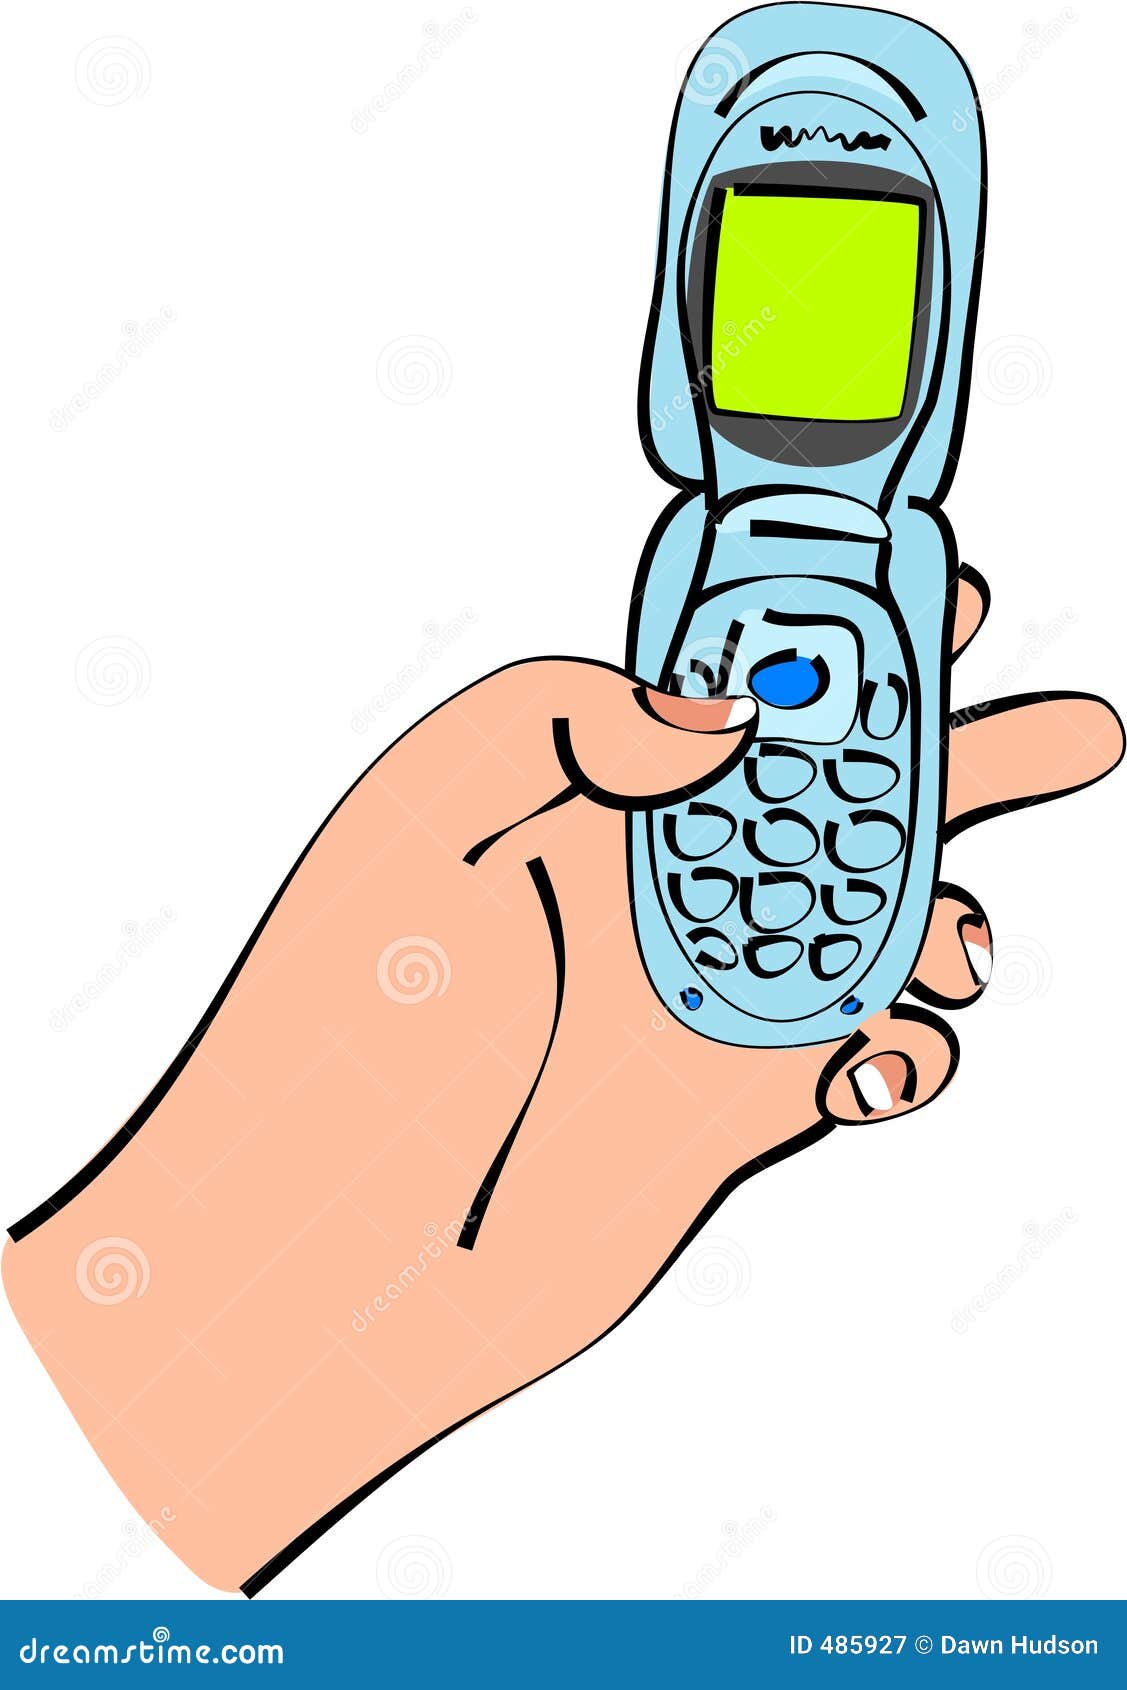 mobile phone sms clipart - photo #44